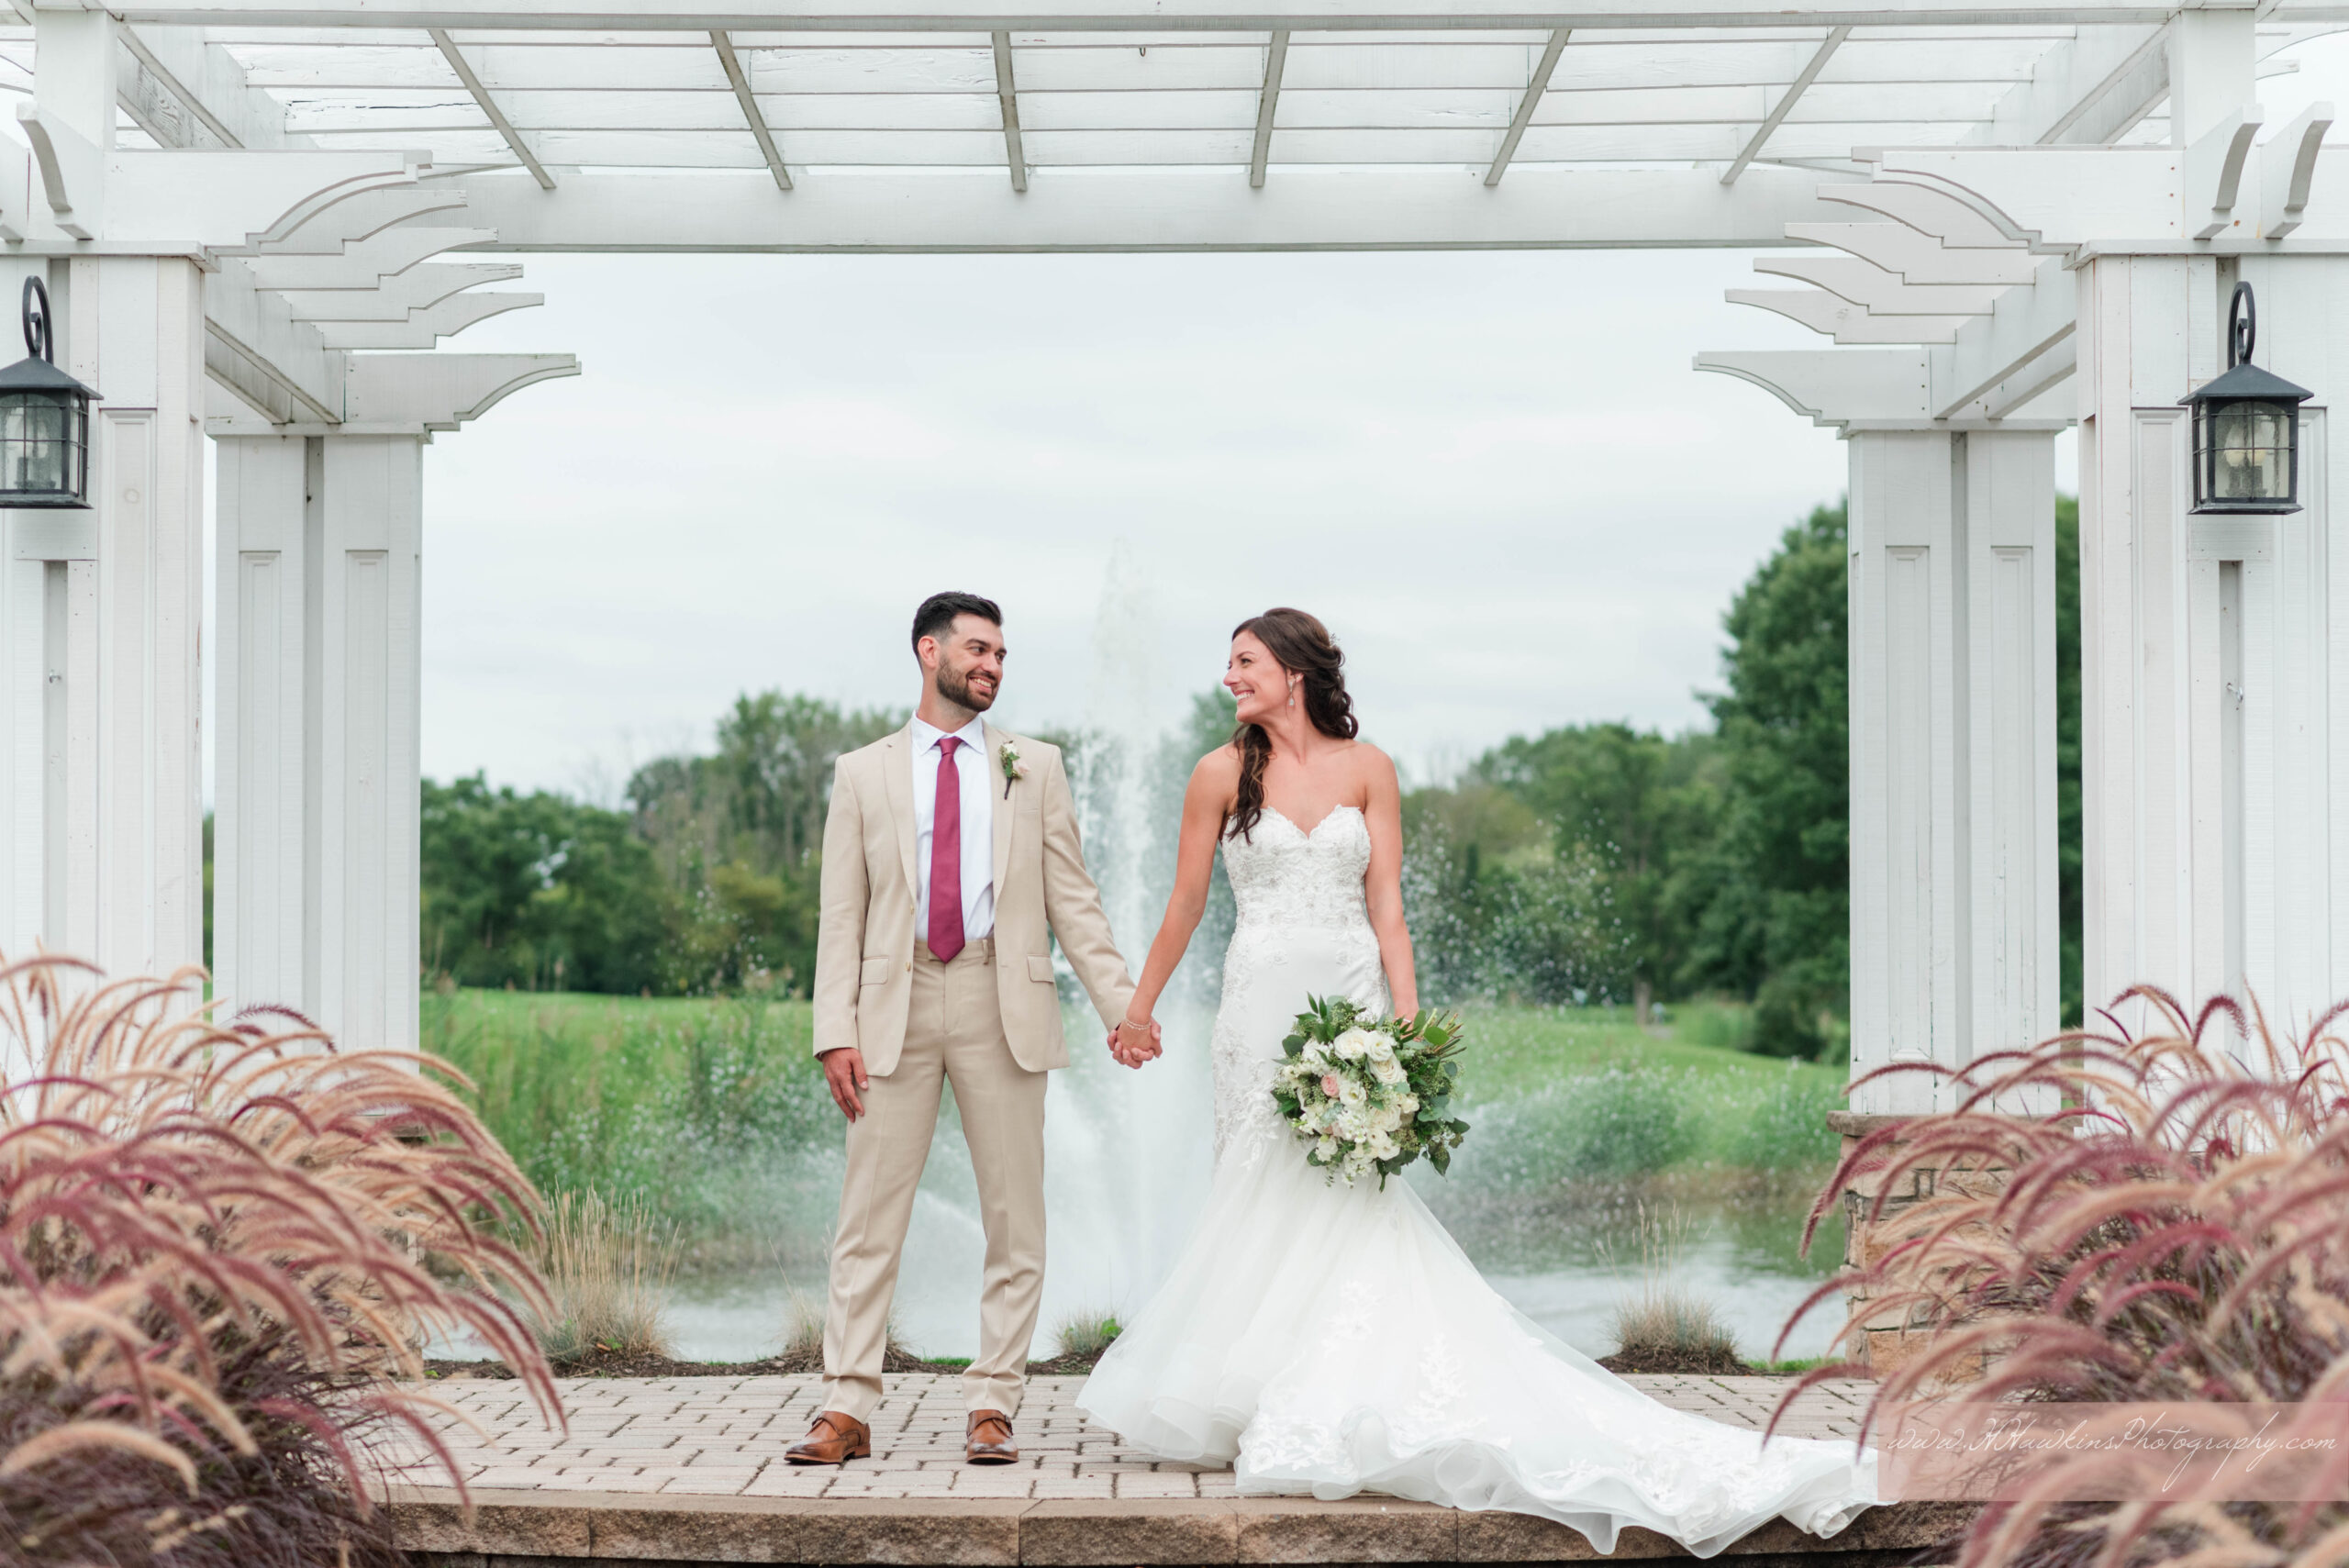 Bride with cathedral length veil and groom during their portrait session at golf course wedding